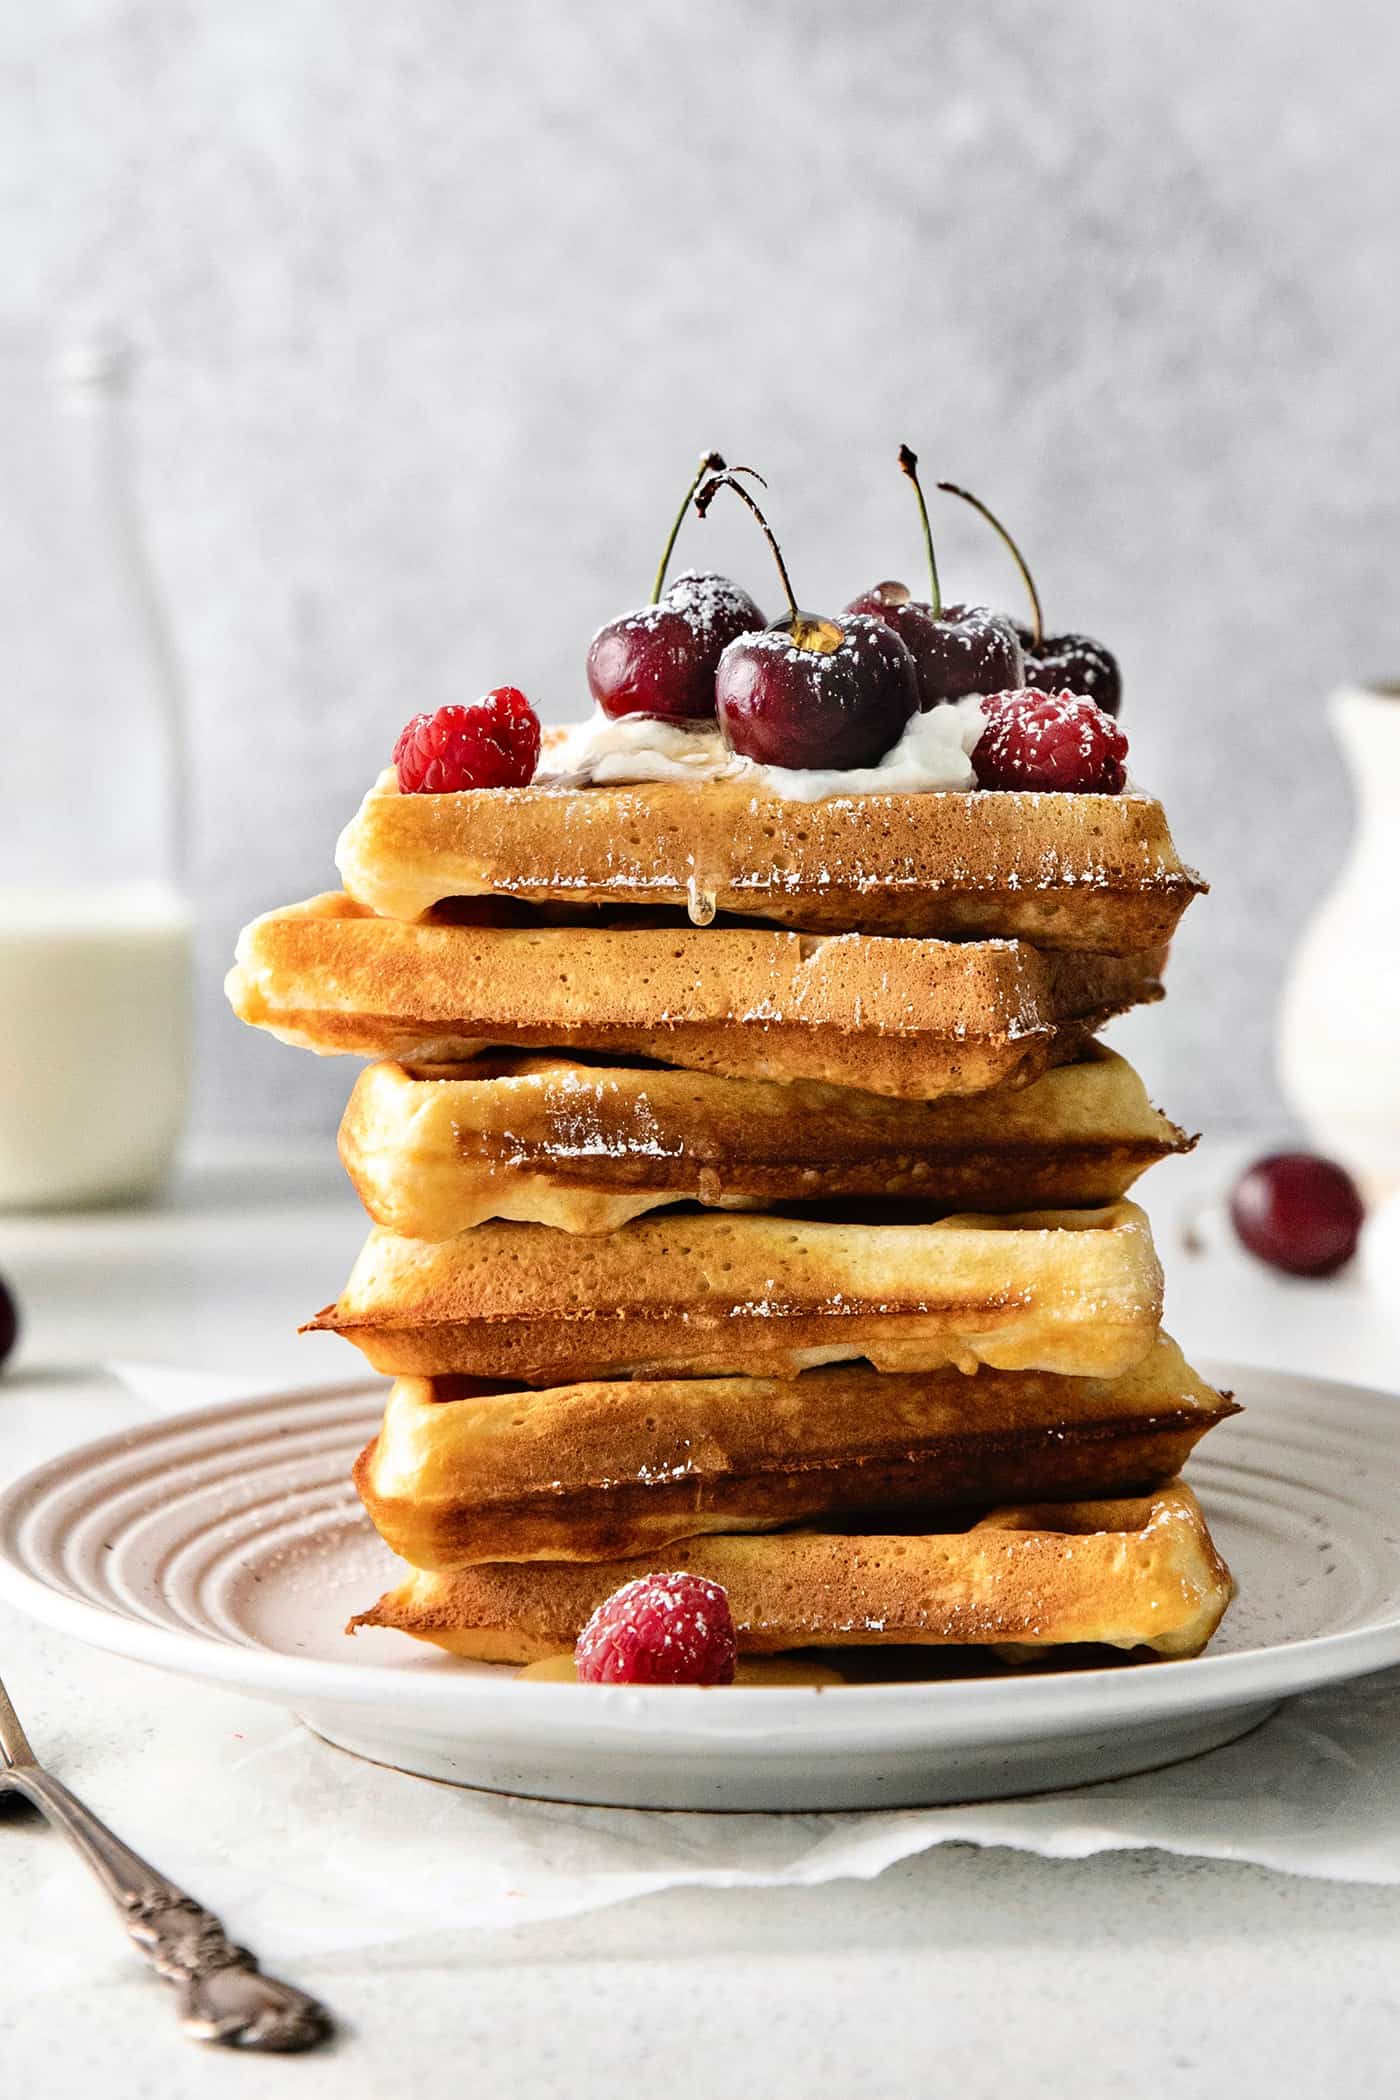 A stack of Belgian waffles topped with cherries